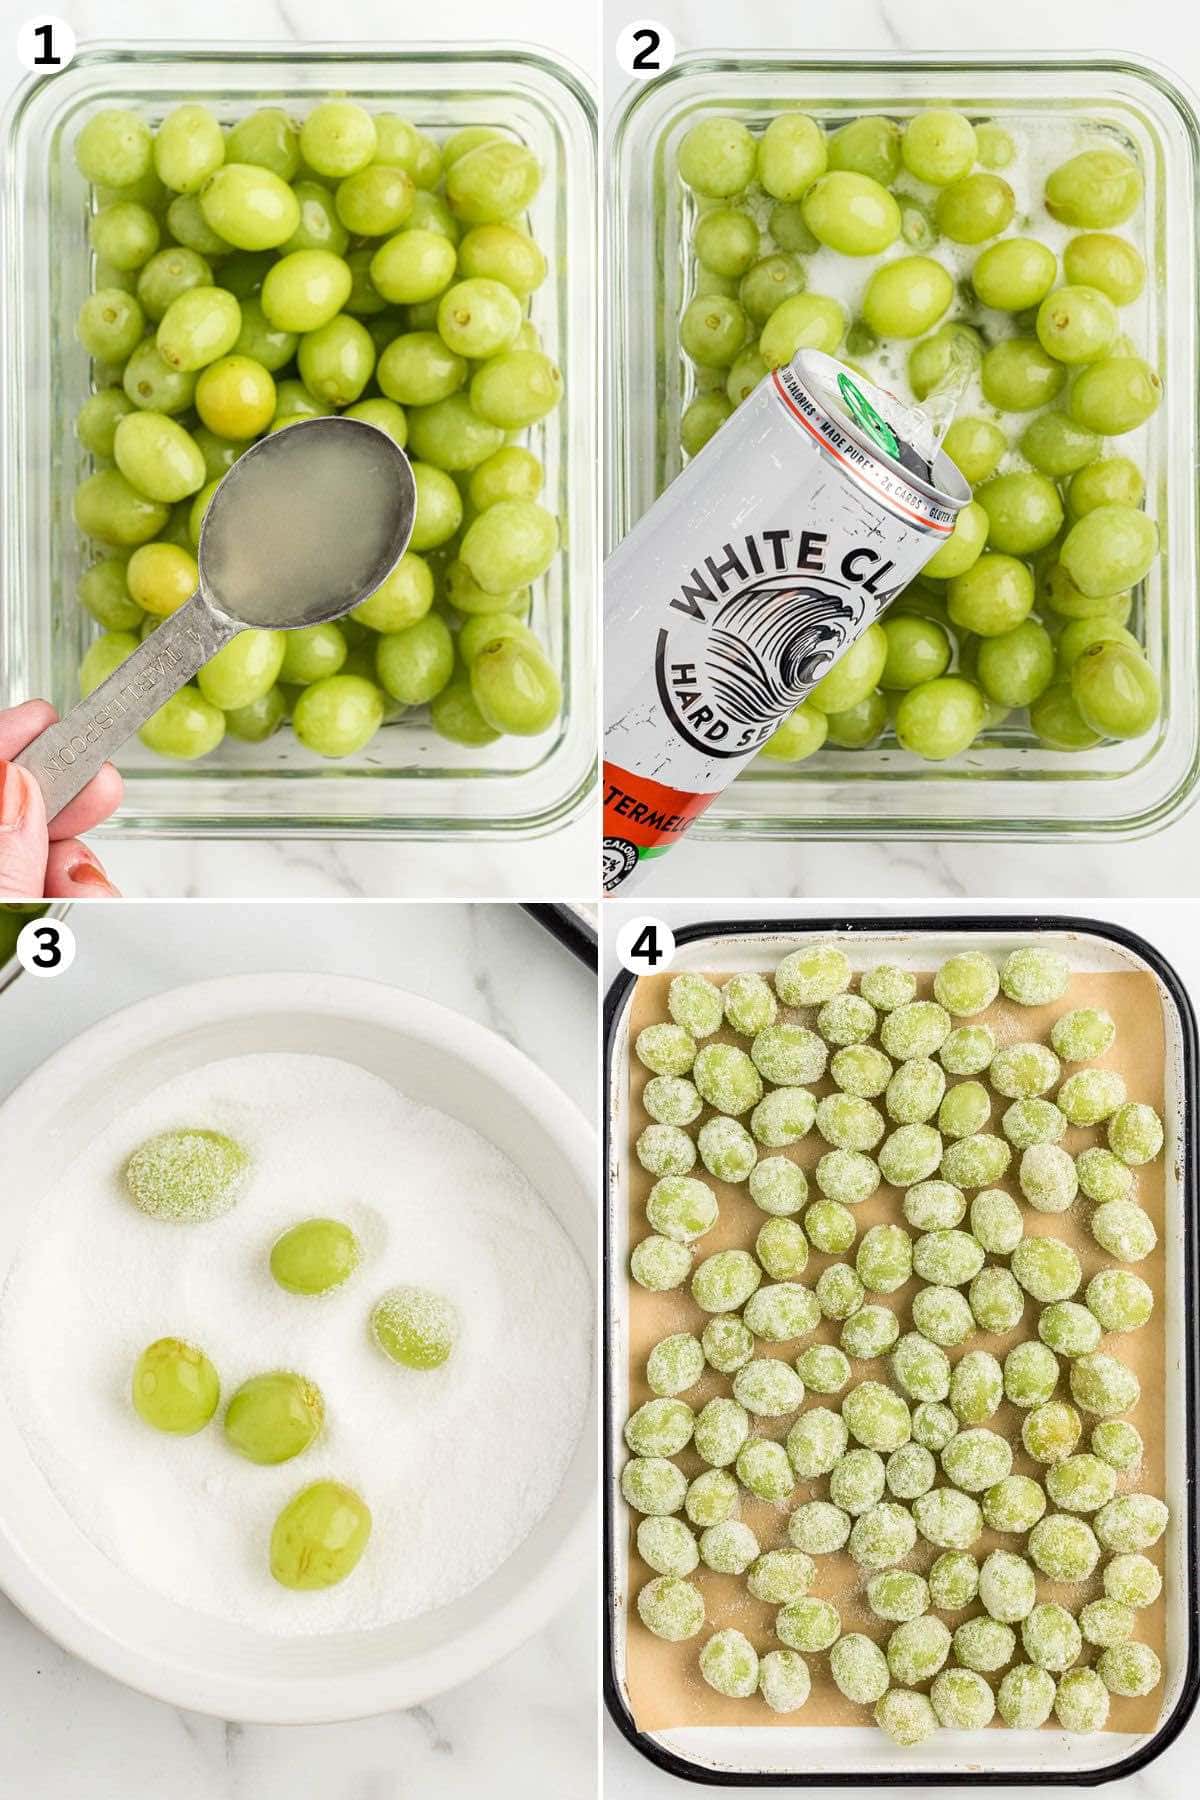 Soak the grapes in a mixture of vodka, lime juice, white claw. Roll 6-8 grapes in the granulated sugar until fully coated. Place the sugar coated grapes in a single layer on the sheet pan.